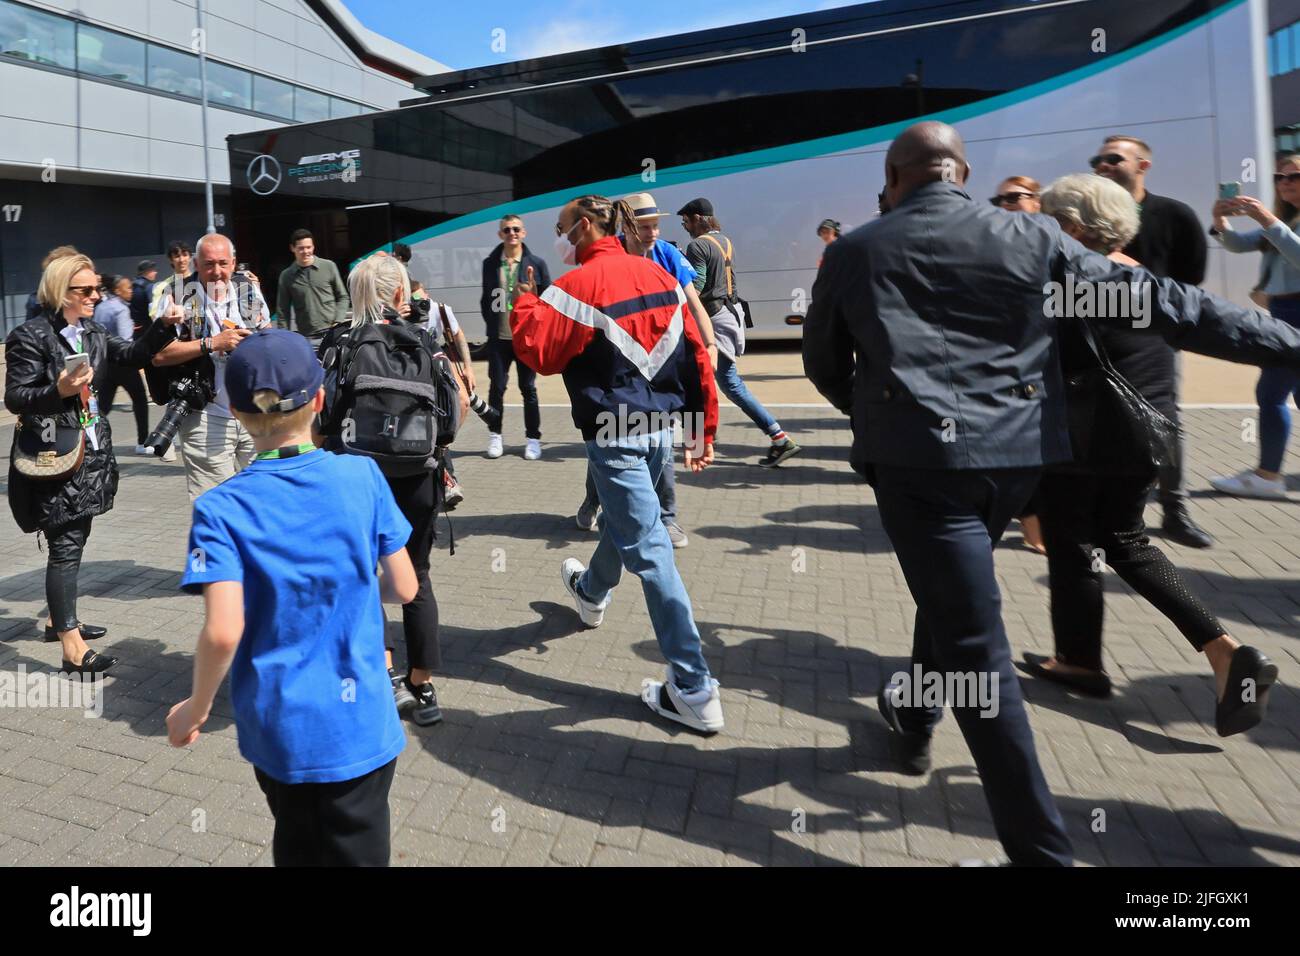 3rd July 2022,  Silverstone Circuit, Silverstone, Northamptonshire, England: British F1 Grand Prix, Race day: Mercedes AMG Petronas F1 Team, Lewis Hamilton arrives to the paddock and crowds surround him to try and get a selfie Stock Photo